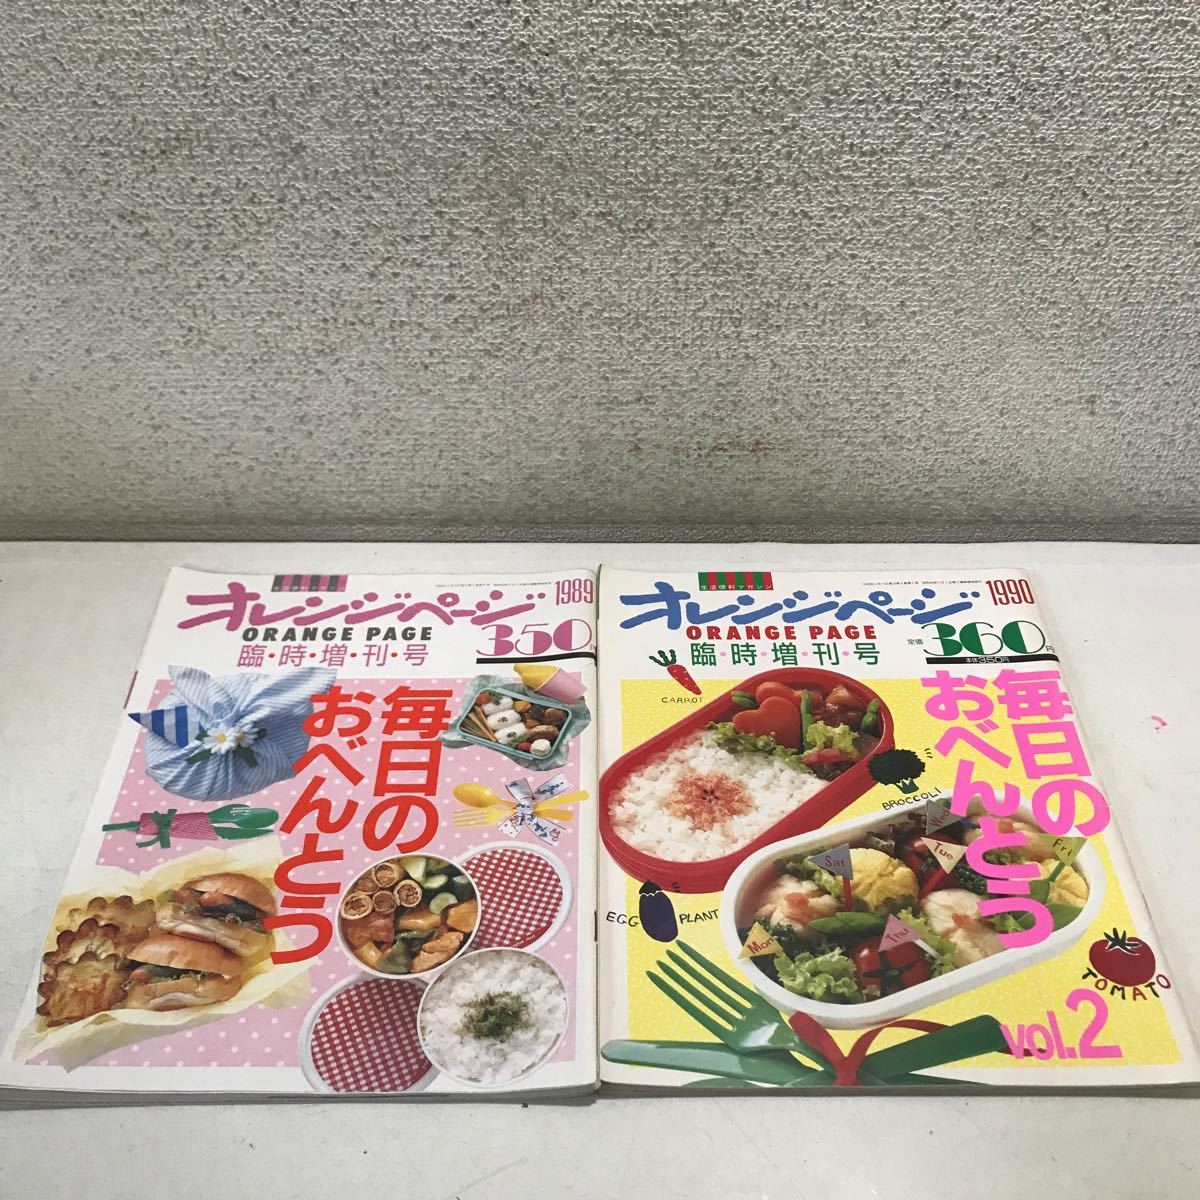 MA02* orange page special increase . number 2 pcs. set every day. o-bento vol.1.2 1989.90 year issue life convenience magazine *230417